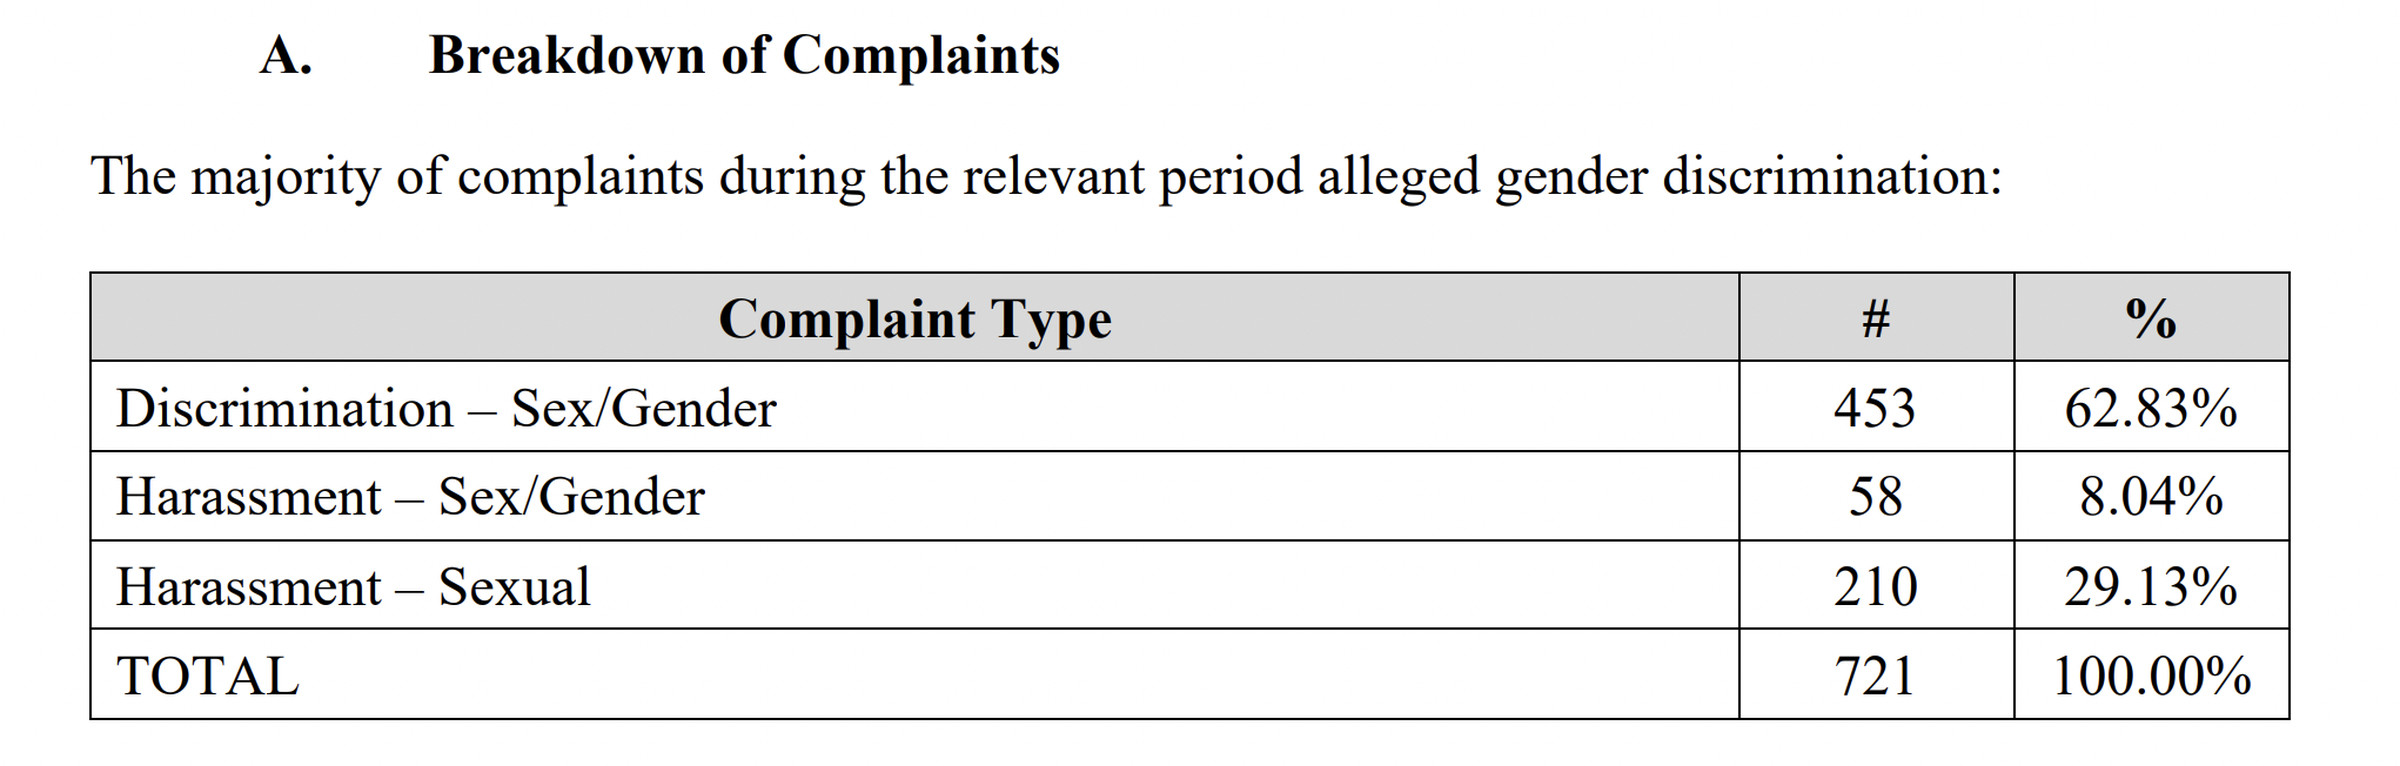 Sex or gender discrimination made up the majority of complaints at Microsoft.